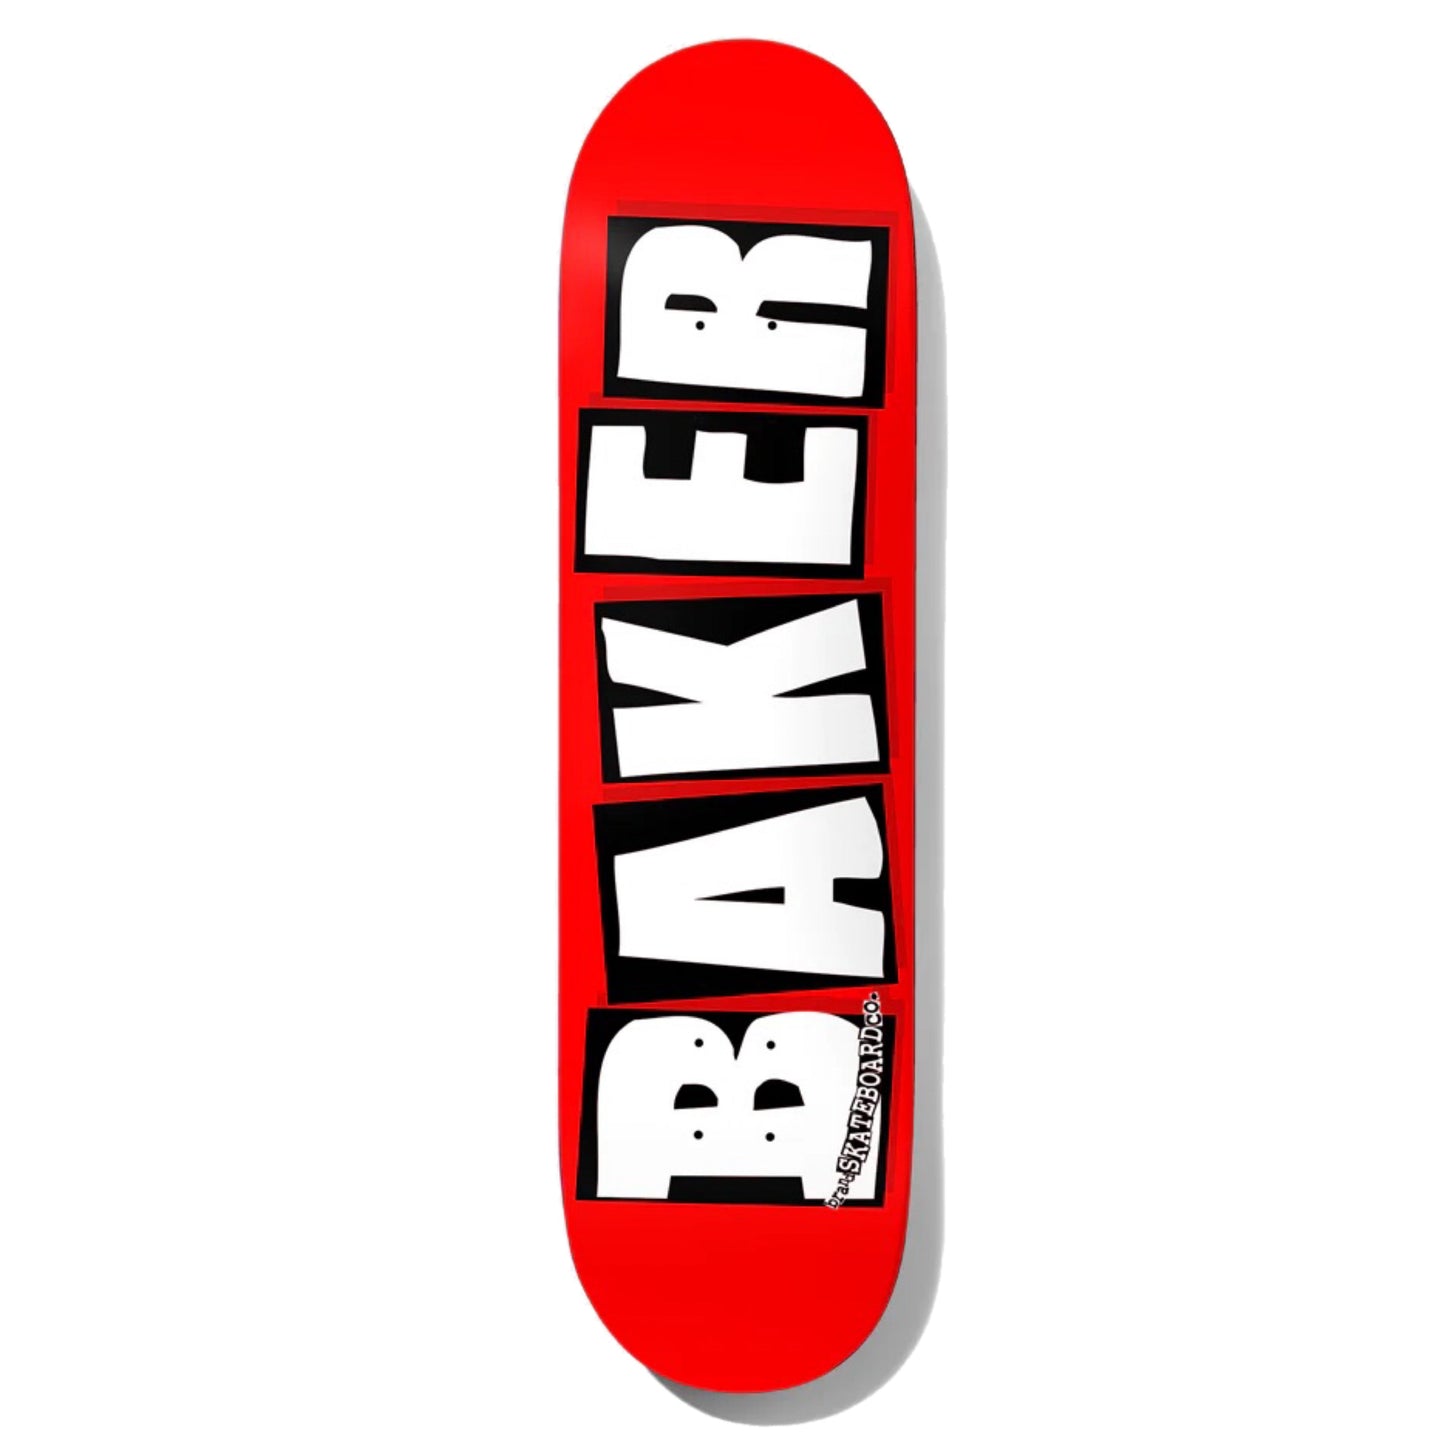 Baker Team Logo Skateboard Deck; Red background; Lettering spells out “Baker” in classic Baker logo which consists of white letters framed in black rectangles; smaller white and black text spells out “brand Skateboard Co.”